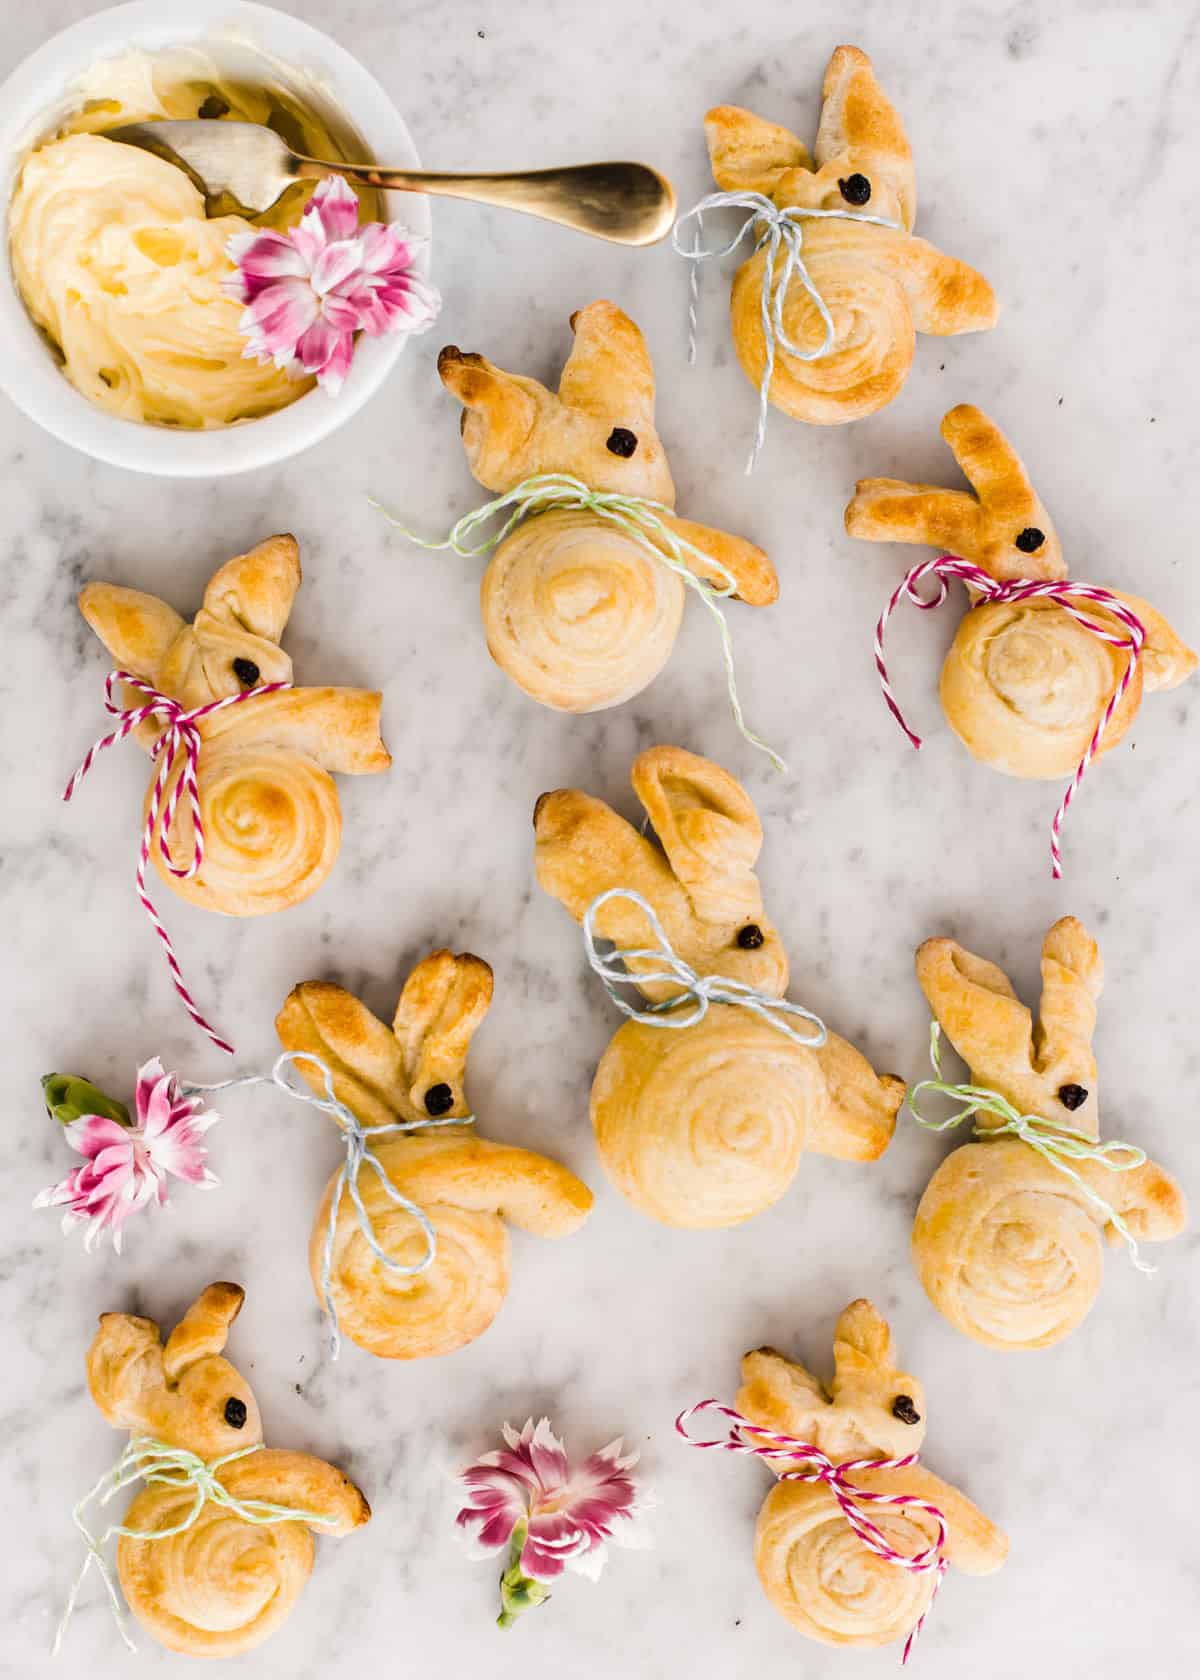 bunny shaped bread rolls on white marble with small bowl of butter on the side.